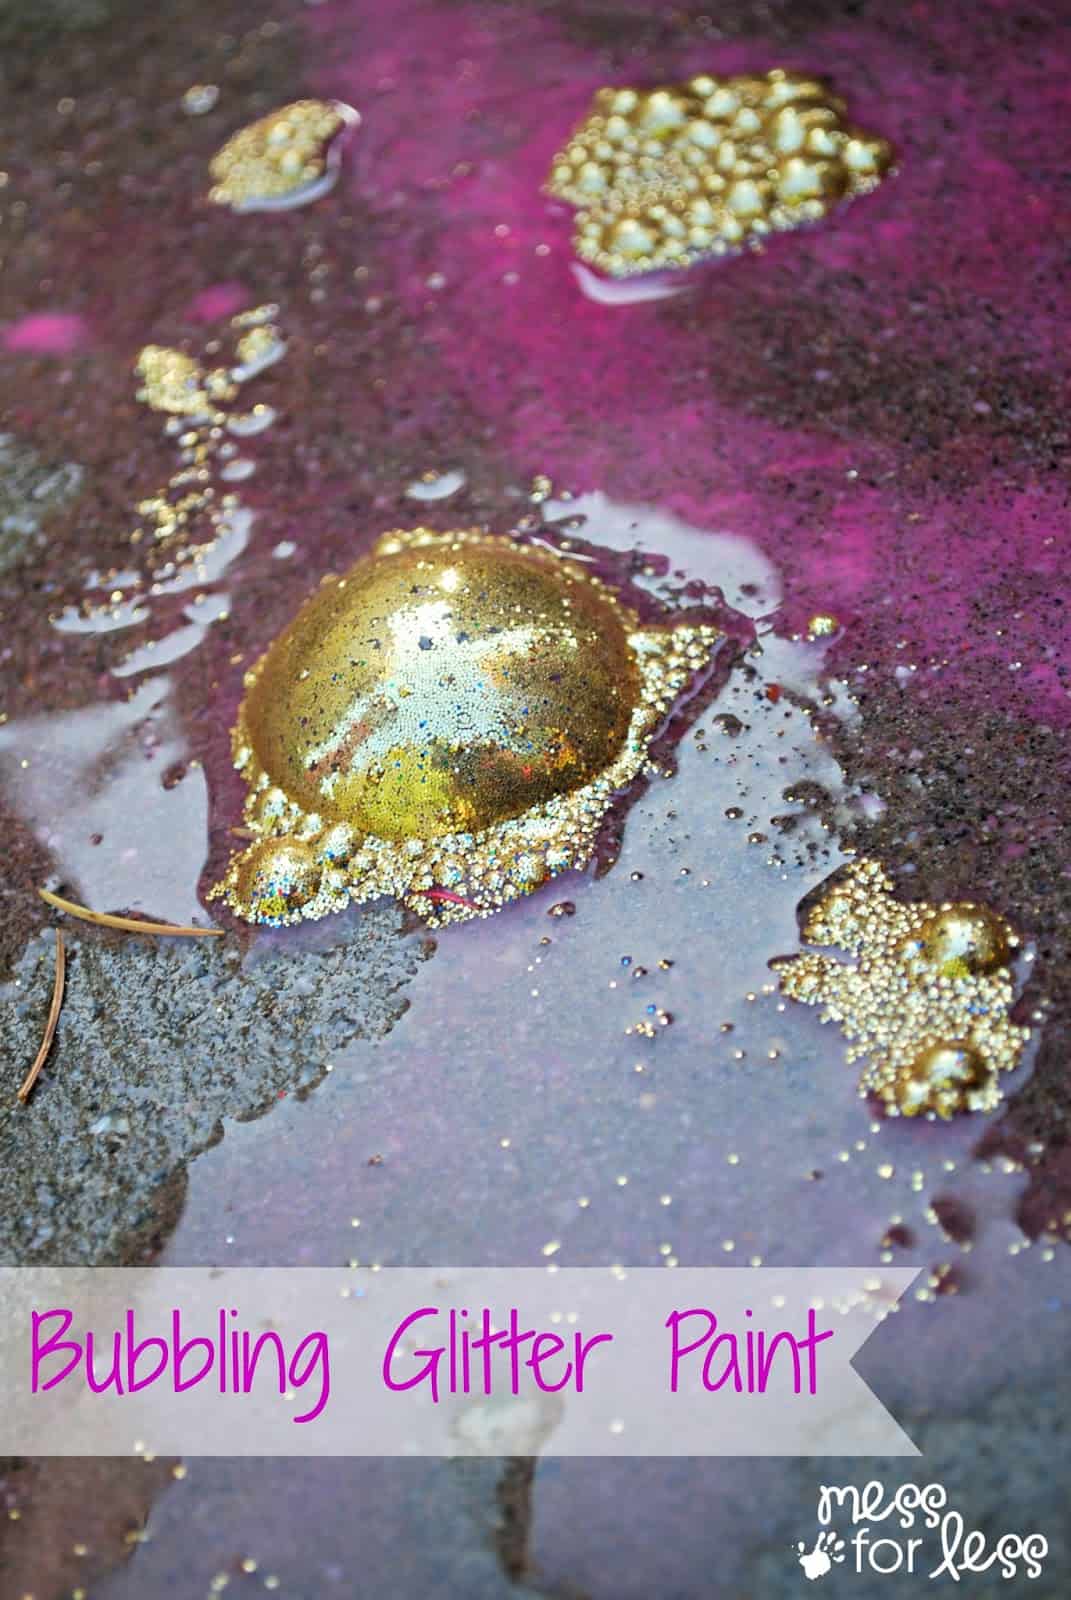 Bubbling Glitter Paint - Learn how to create this simple outdoor paint using items you already have at home.